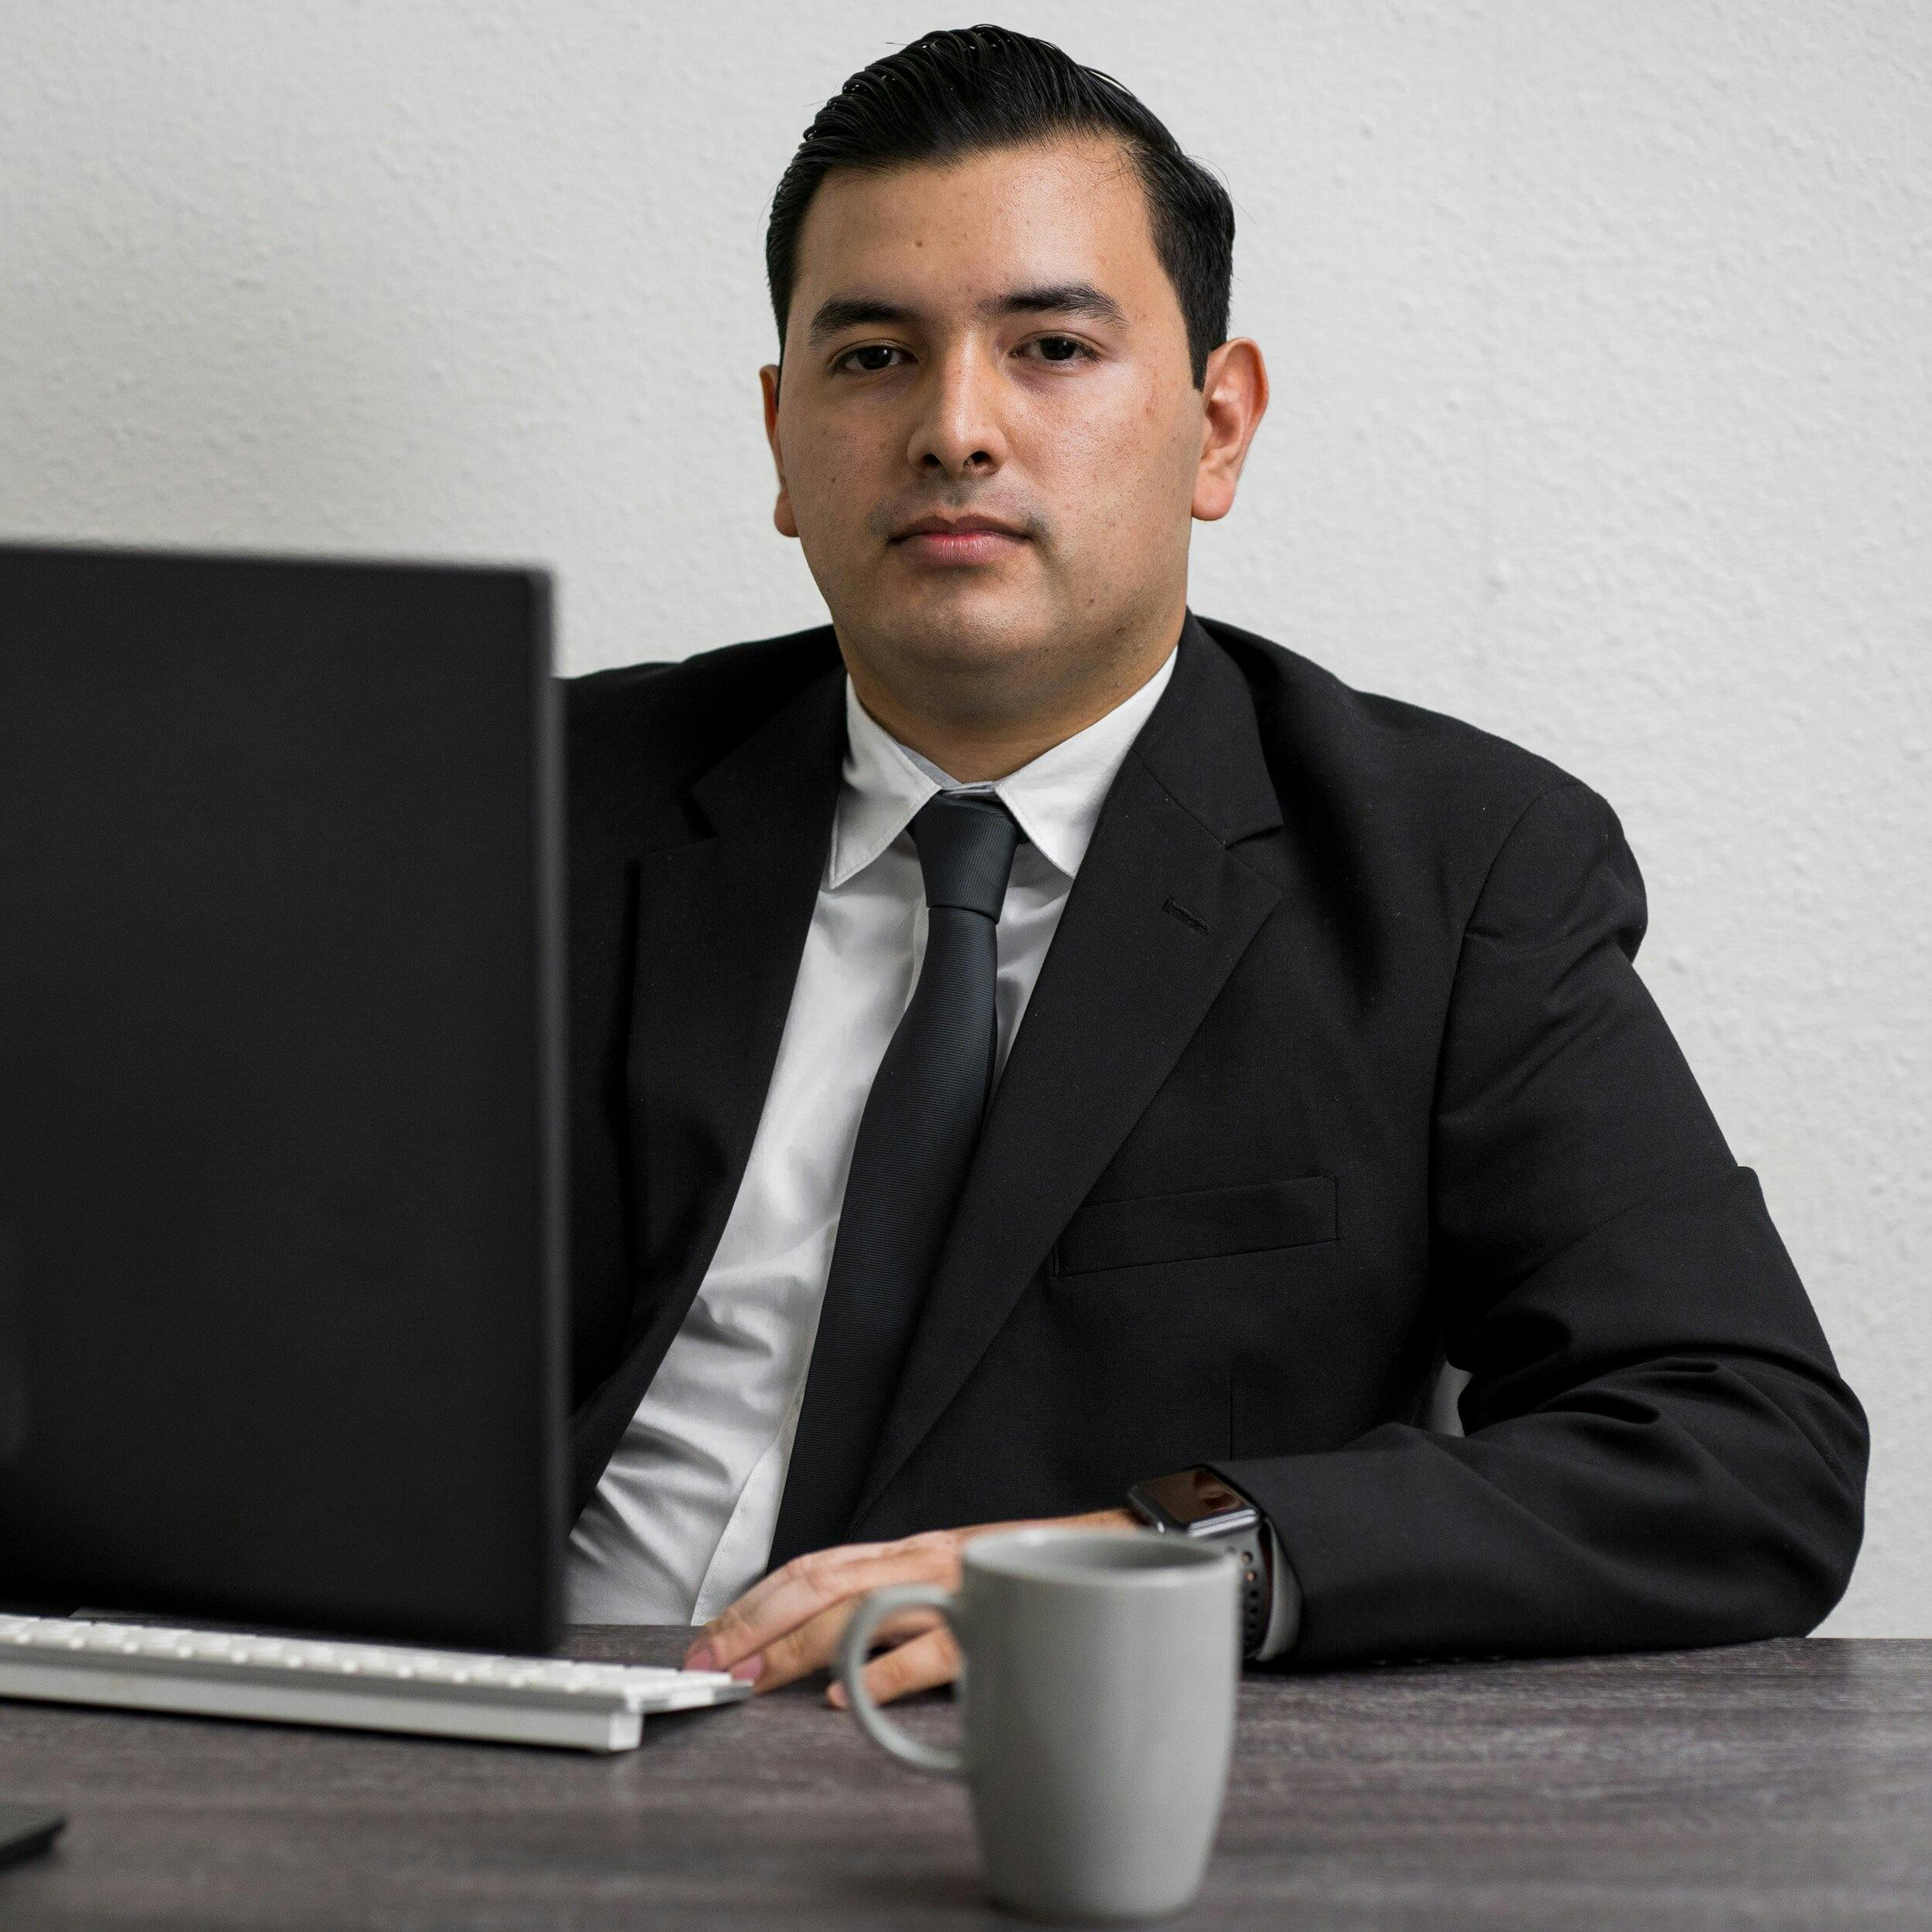 Man in suit behind a laptop